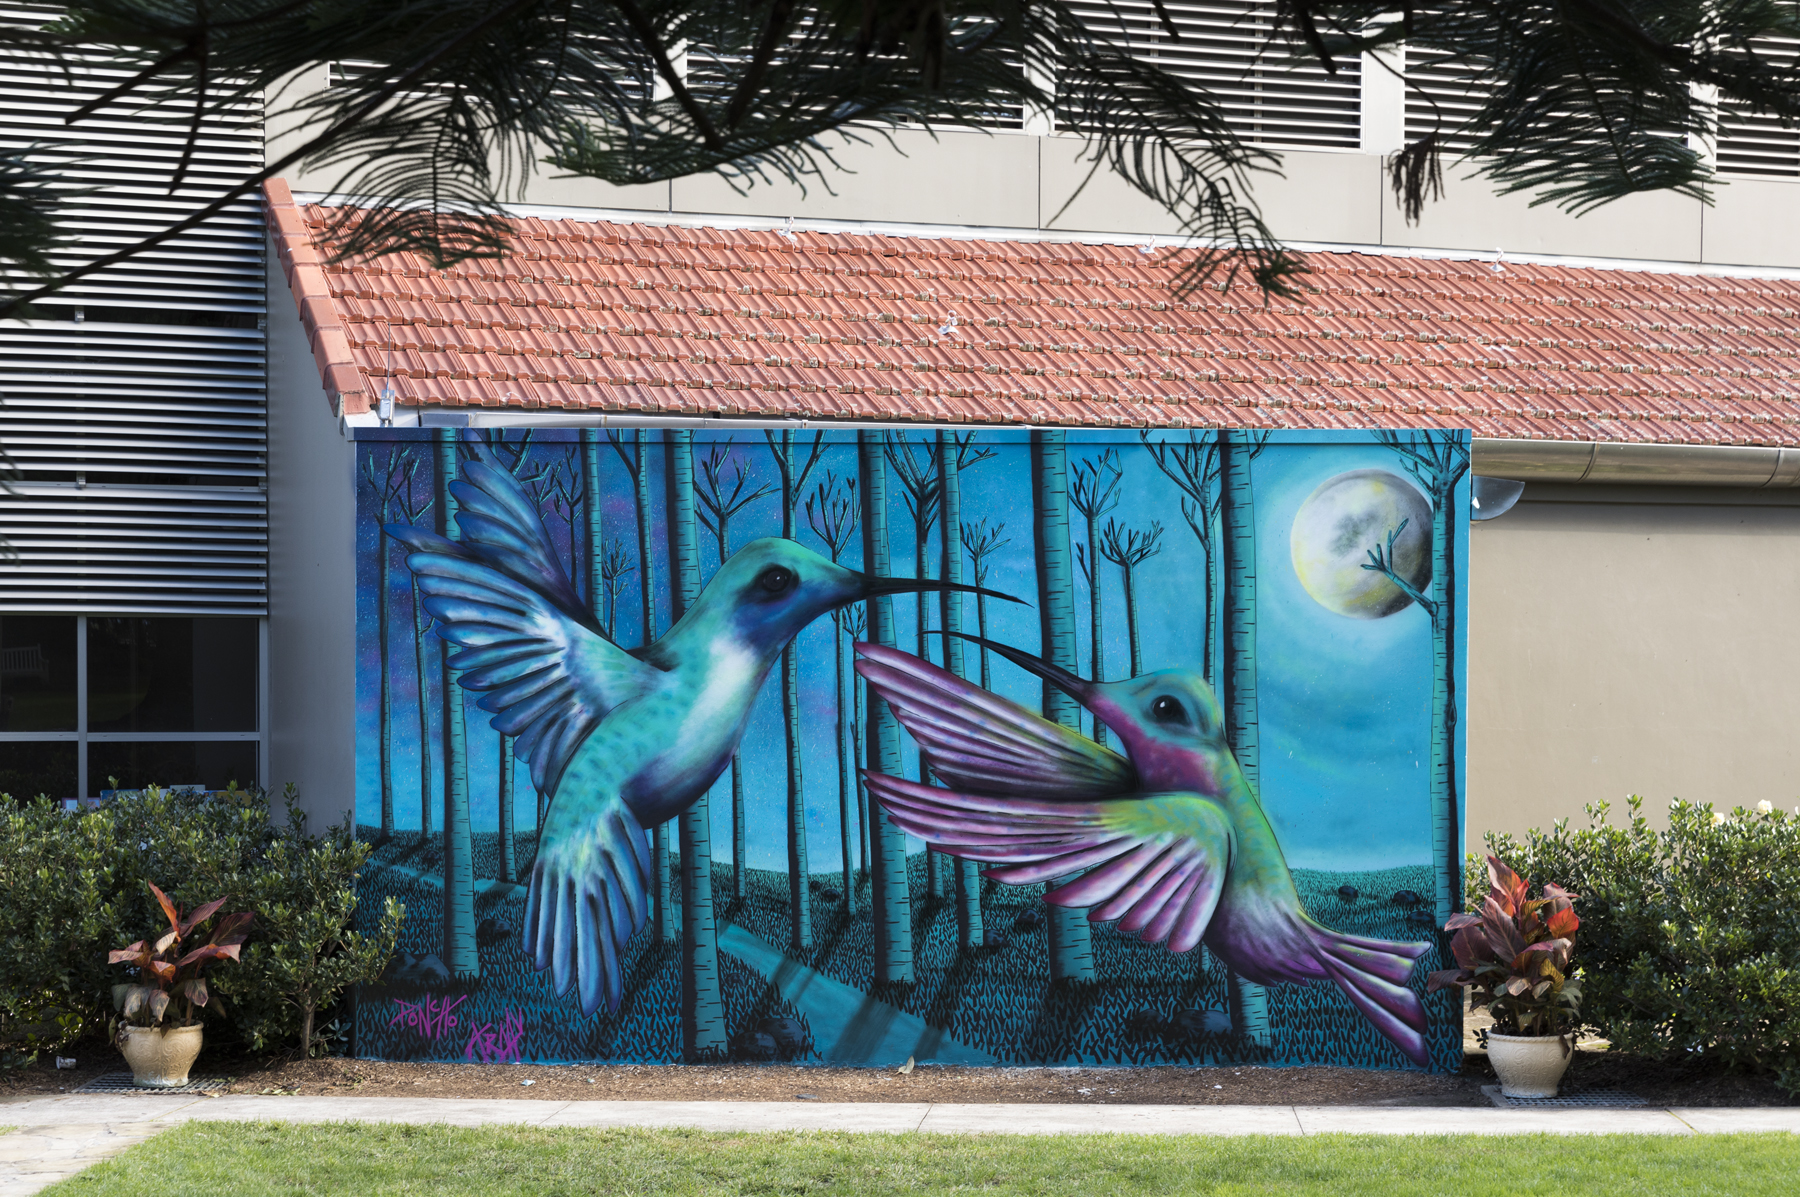 A large outdoor mural featuring a forest scene at night. The mural is dominated by two large, colourful Hummingbirds.